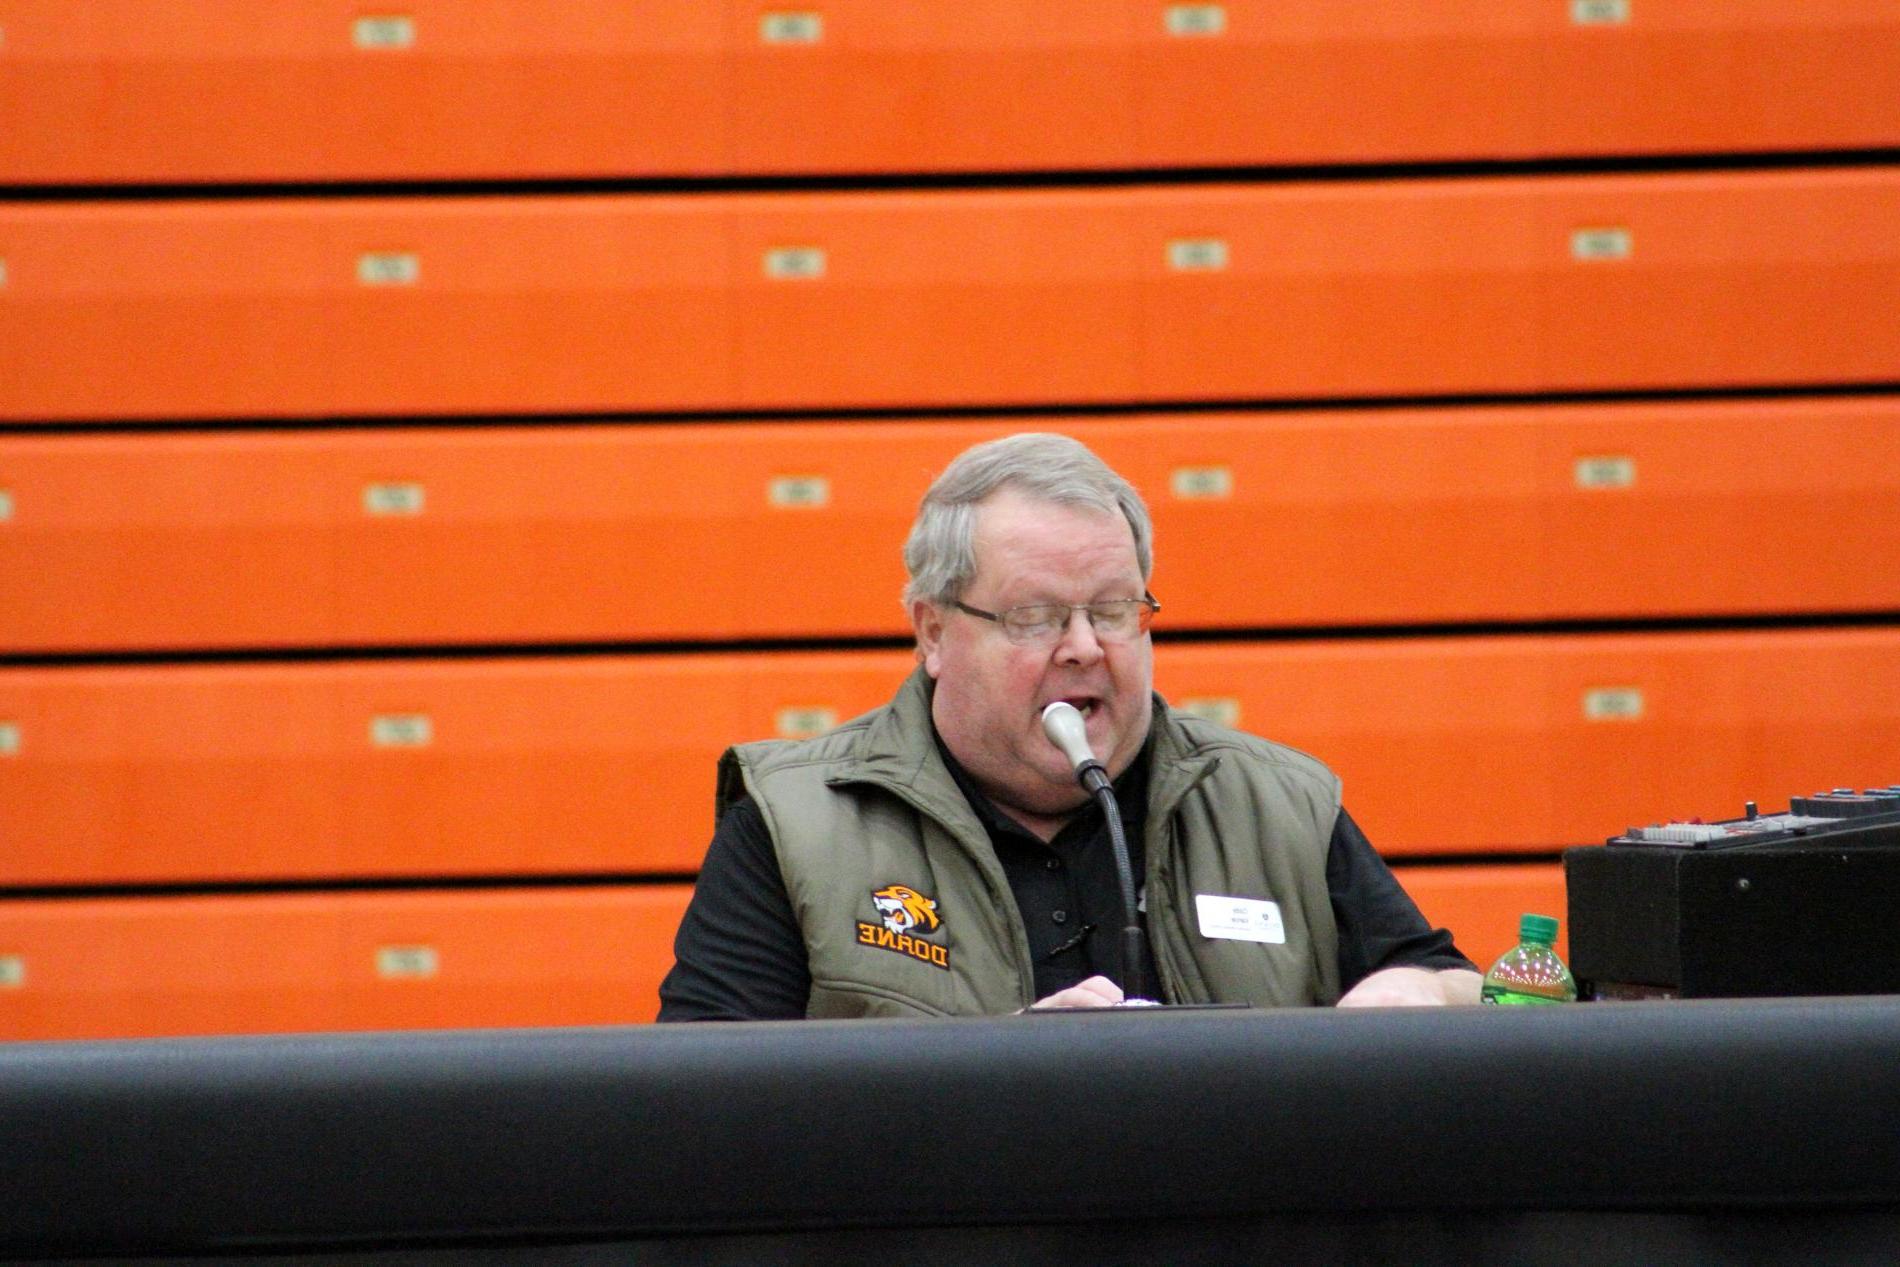 Cody Vance sits behind a mic at Haddix as the public address announcer at Doane University 